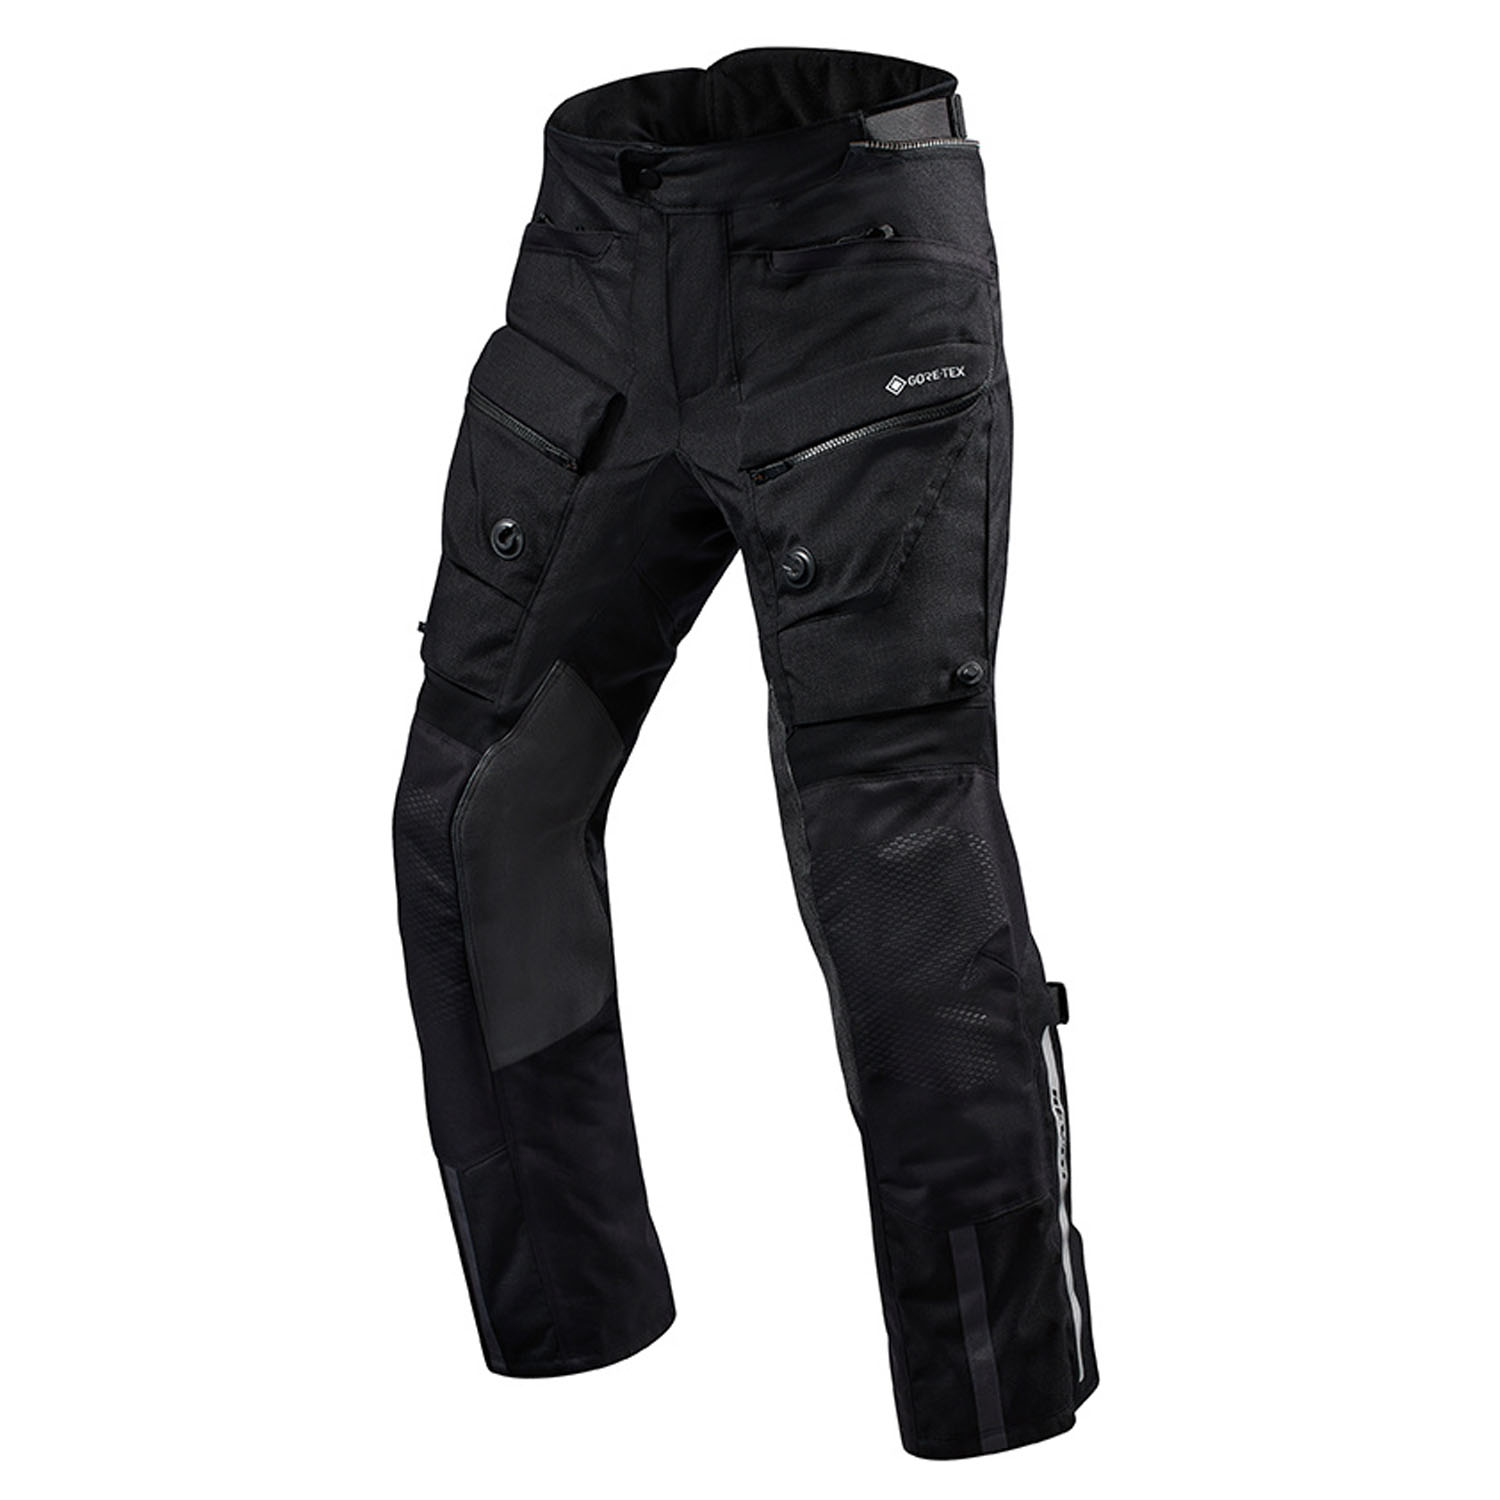 Image of REV'IT! Trousers Defender 3 GTX Black Long Motorcycle Pants Taille 2XL